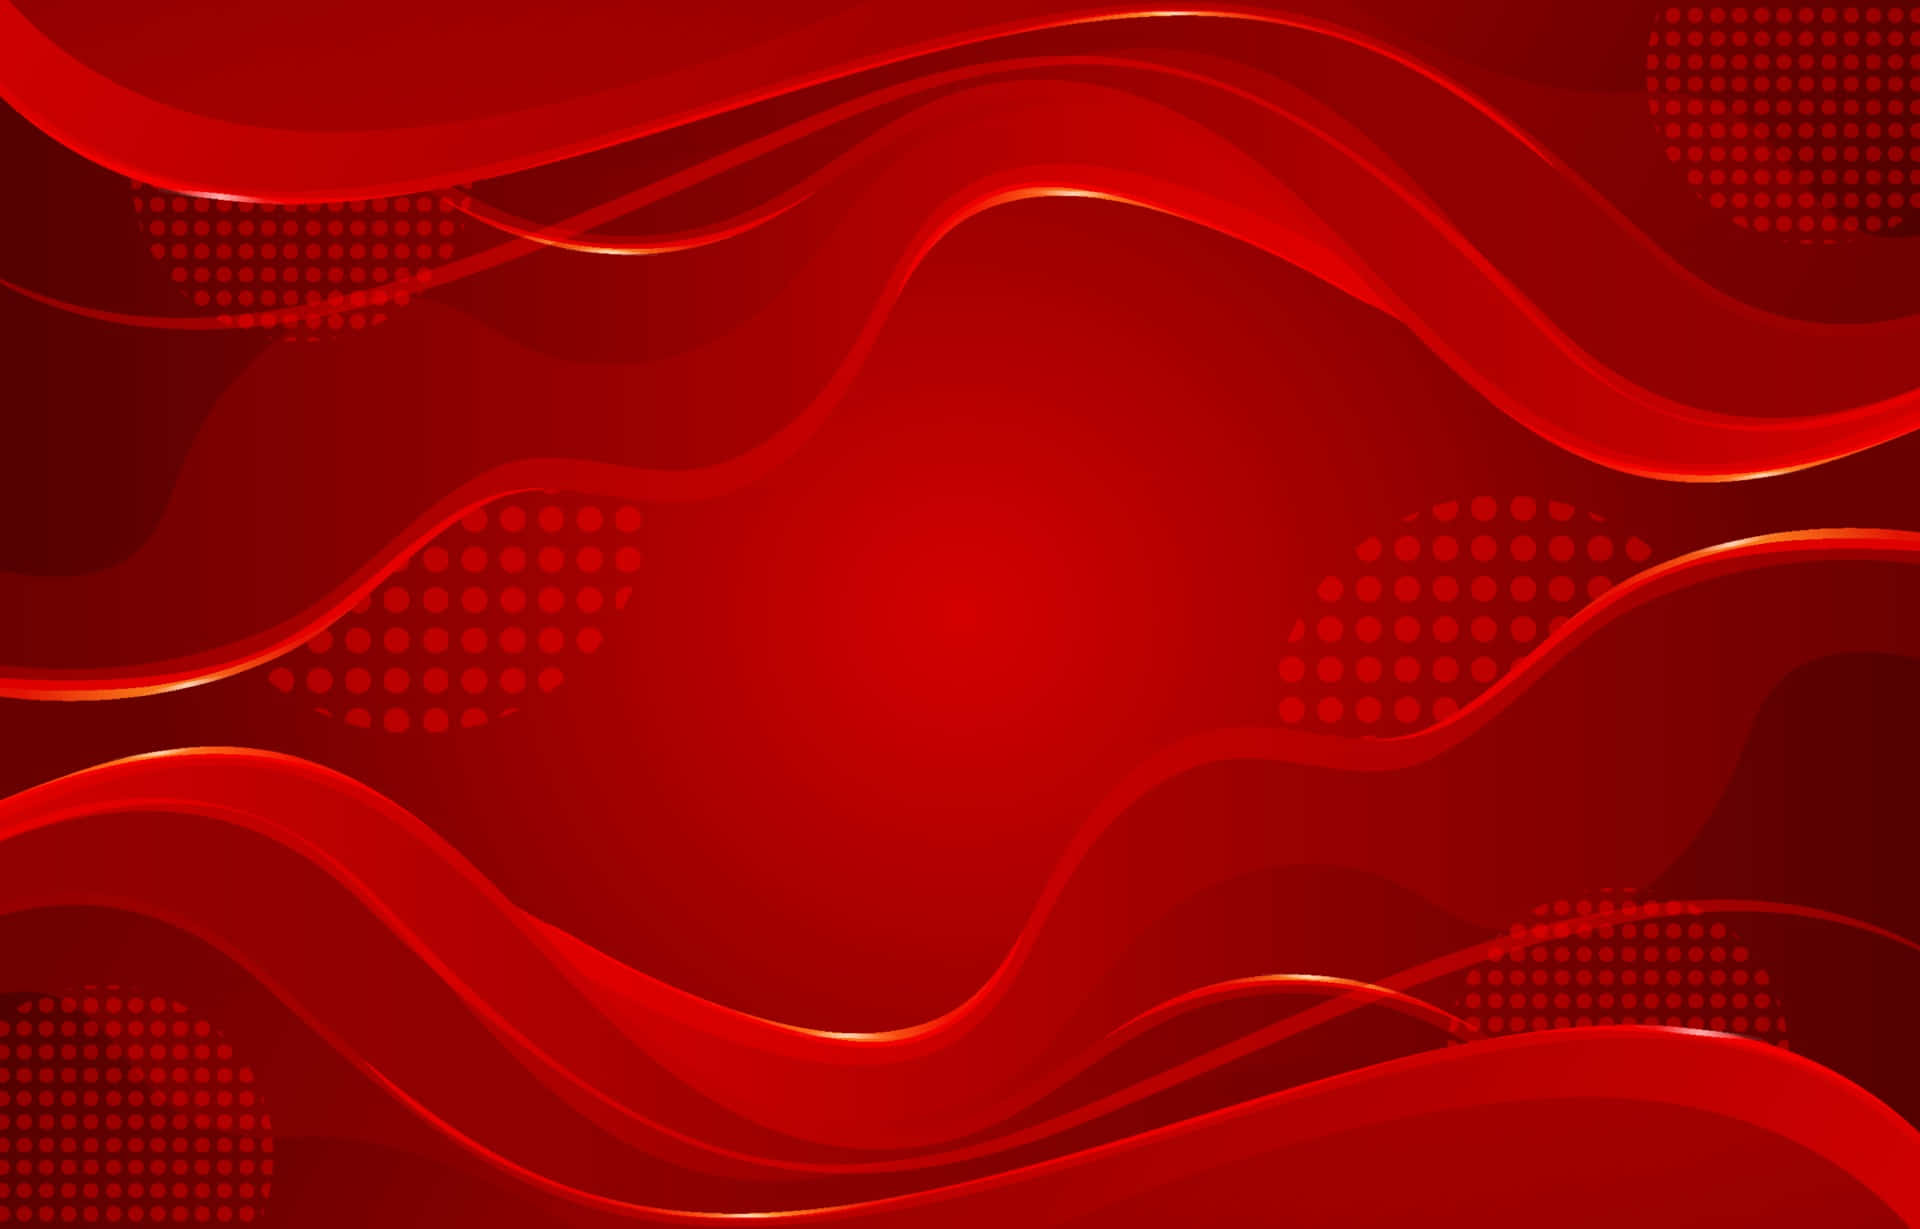 Transparent And Solid Red Waves Vector Background